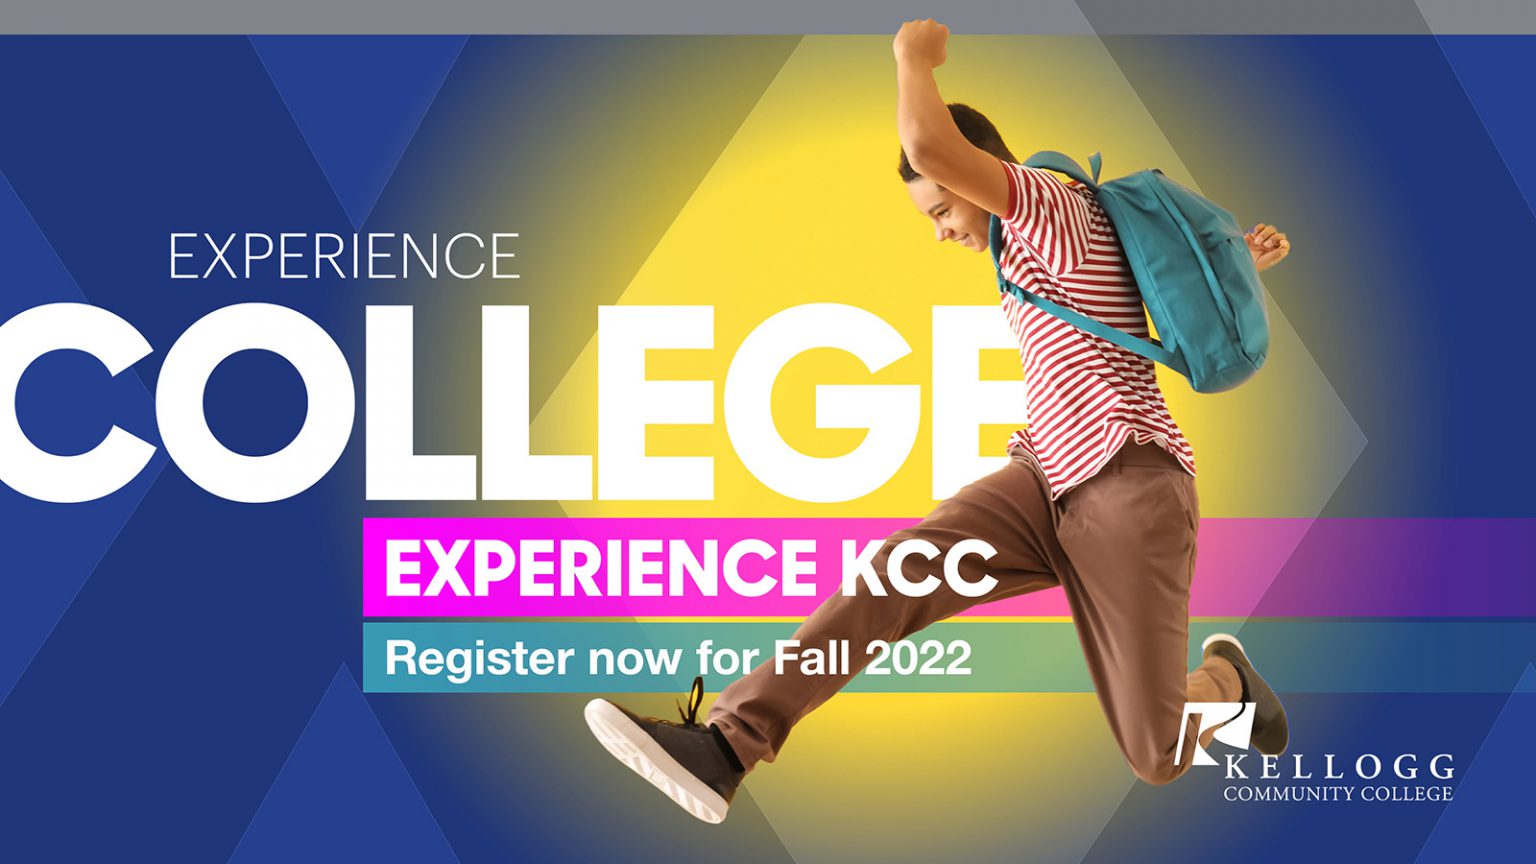 Kellogg Community College offering nearly 300 classes this fall on five